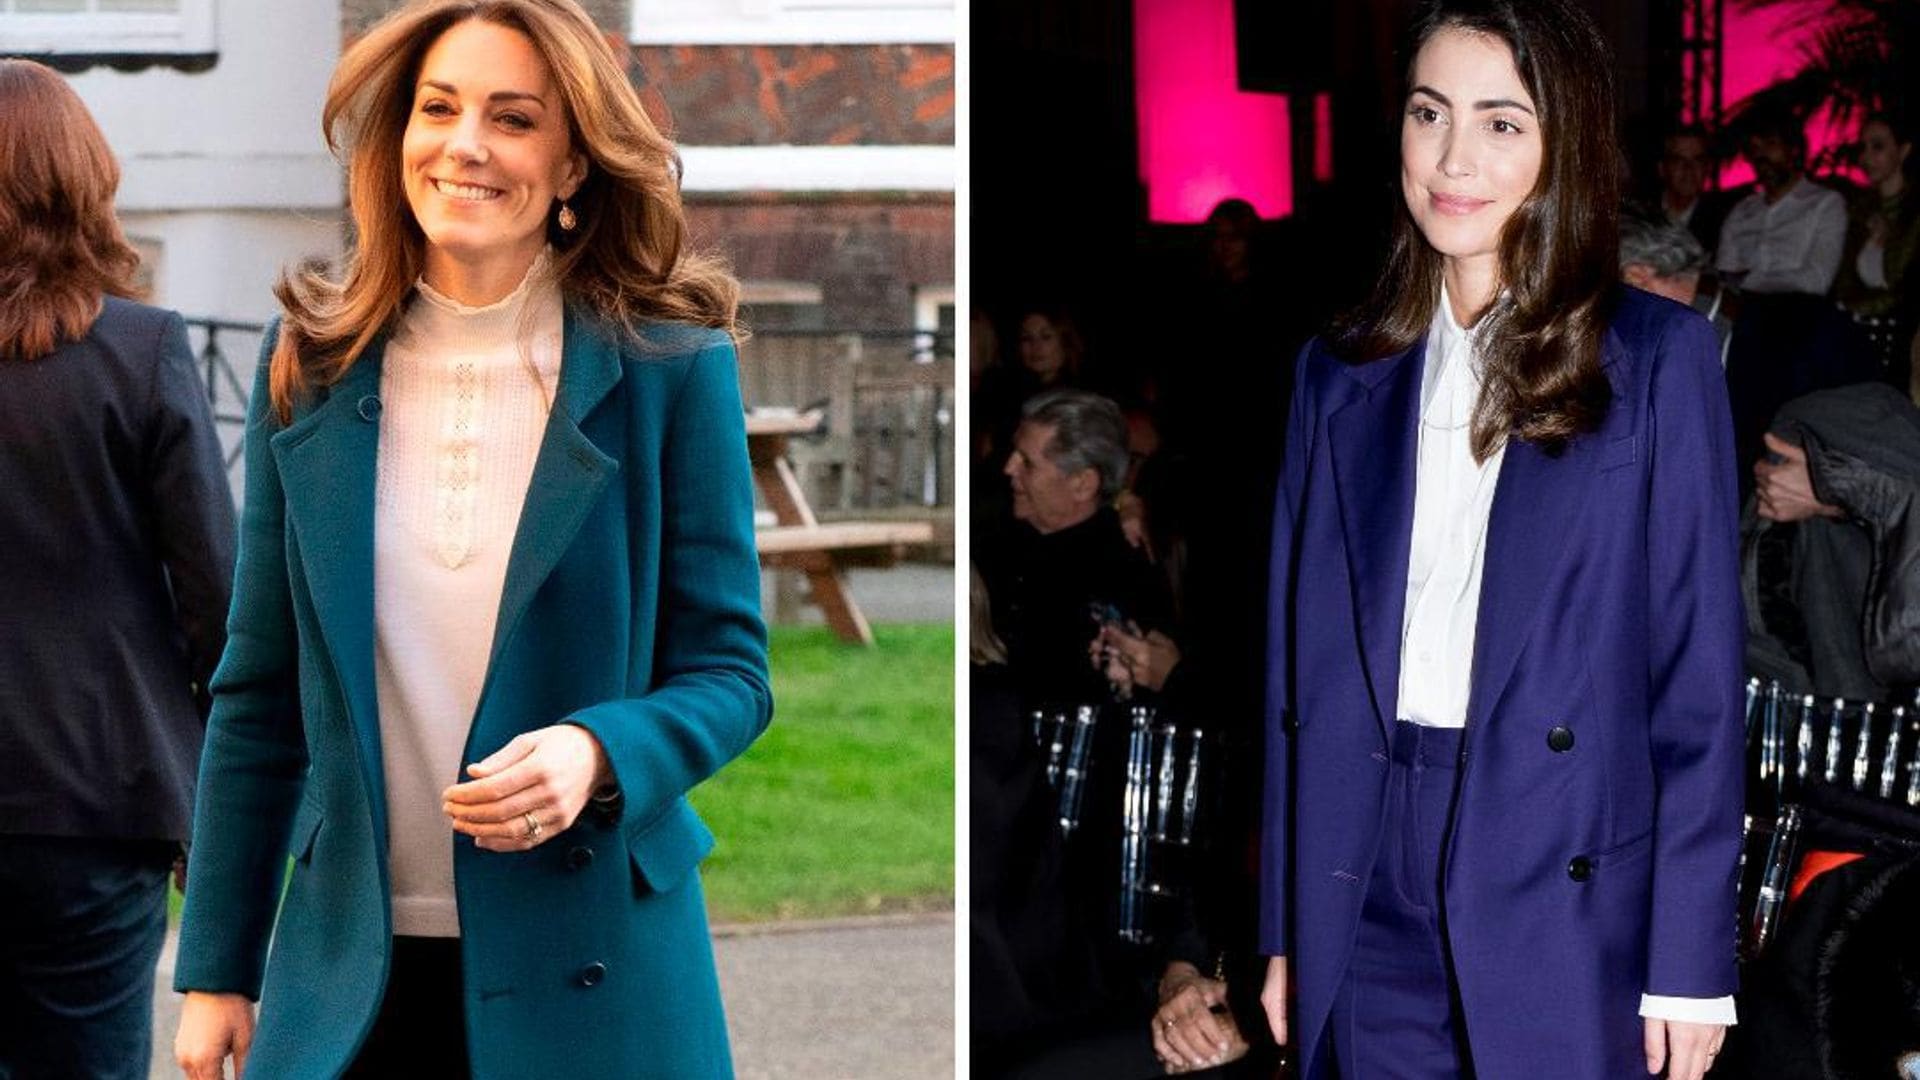 Kate Middleton, Alessandra de Osma and more lead the way to chic royal style